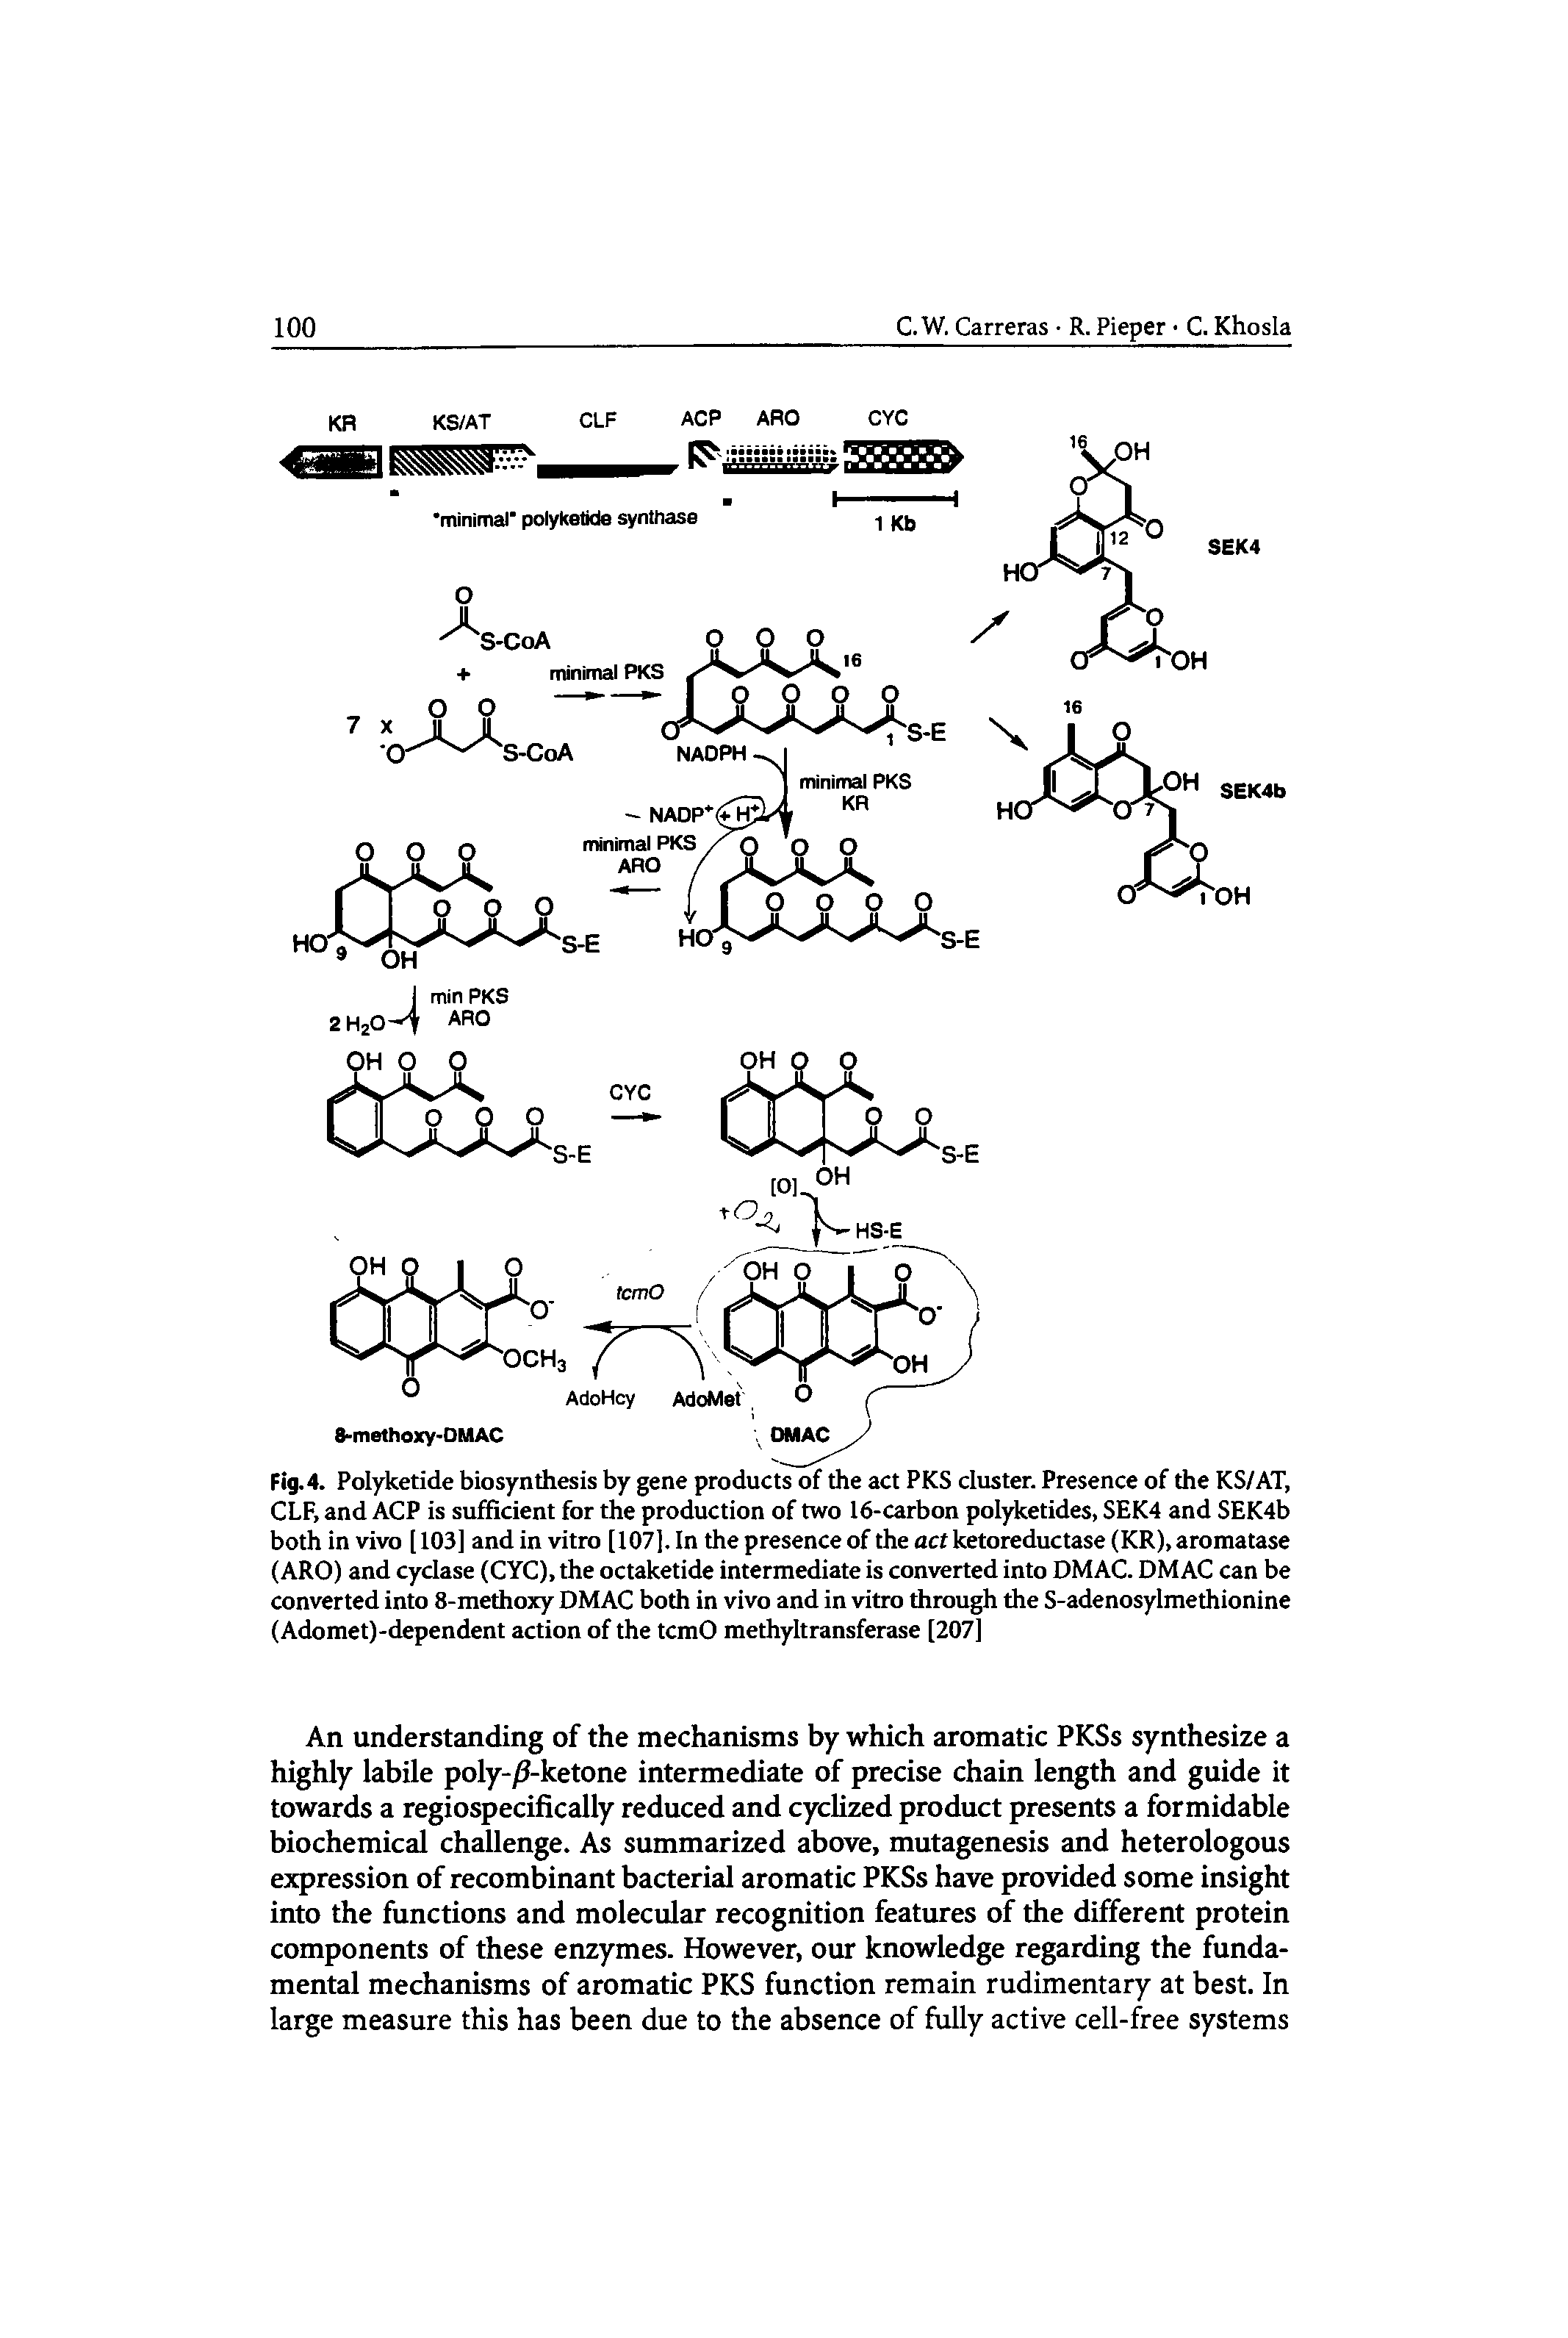 Fig. 4. Polyketide biosynthesis by gene products of the act PKS cluster. Presence of the KS/AT, CLF, and ACP is sufficient for the production of two 16-carbon polyketides, SEK4 and SEK4b both in vivo [ 103] and in vitro [107]. In the presence of the act ketoreductase (KR), aromatase (ARO) and cyclase (CYC), the octaketide intermediate is converted into DMAC. DMAC can be converted into 8-methoxy DMAC both in vivo and in vitro through the S-adenosylmethionine (Adomet)-dependent action of the tcmO methyltransferase [207]...